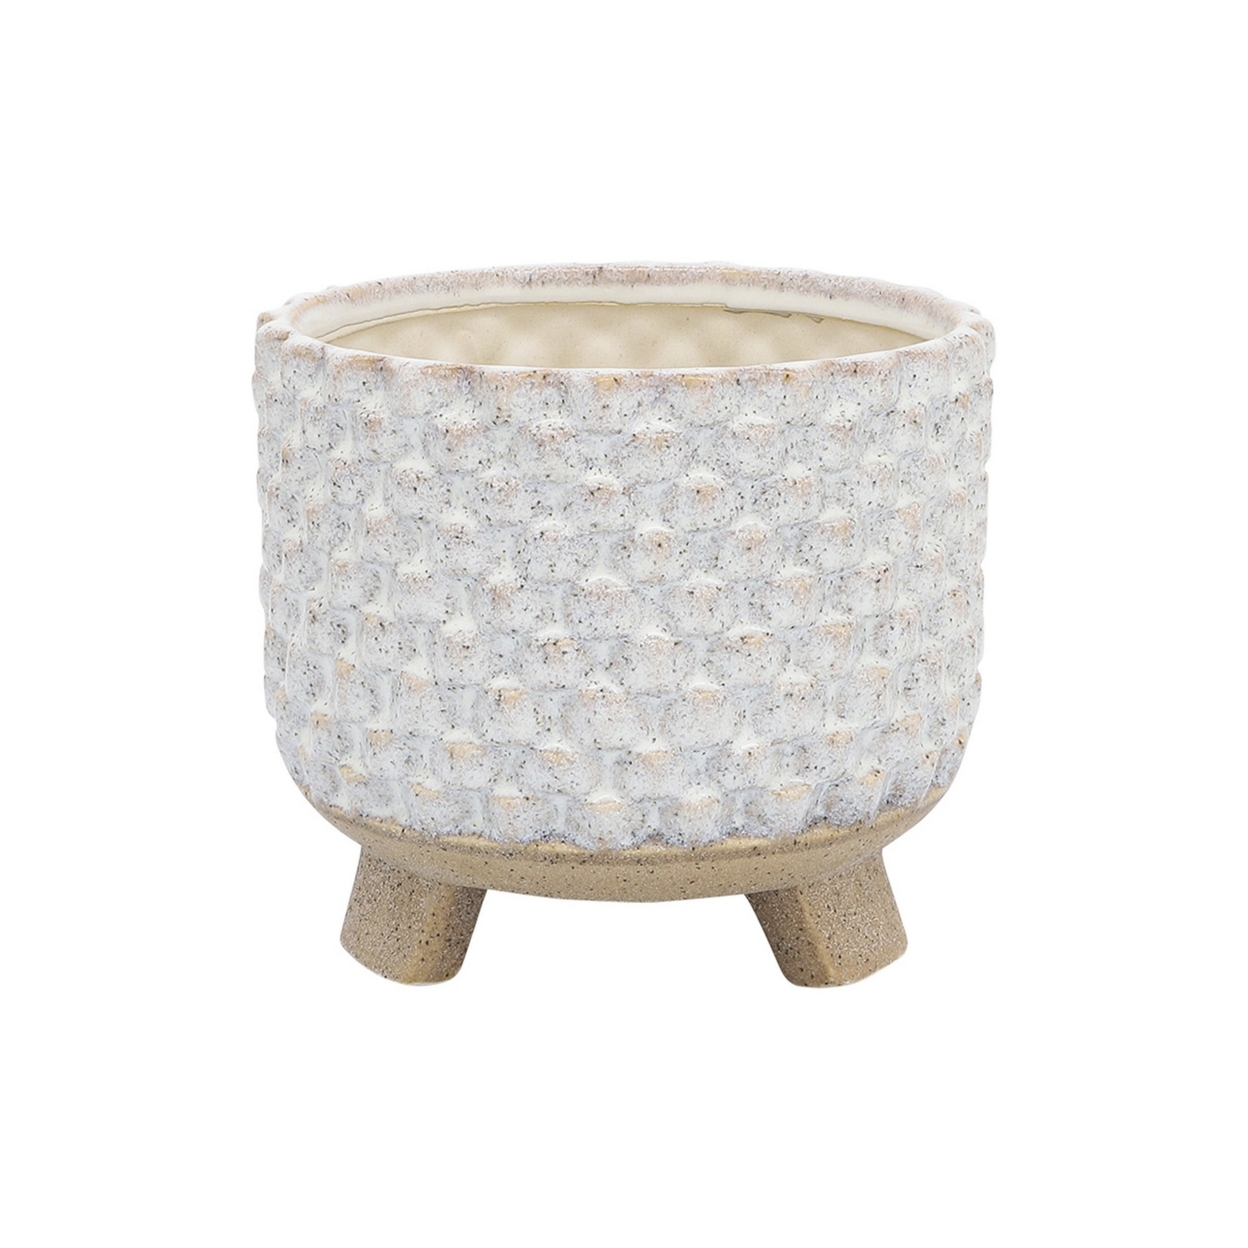 Planter With Textured Design And Footed Base, Set Of 2, Off White- Saltoro Sherpi